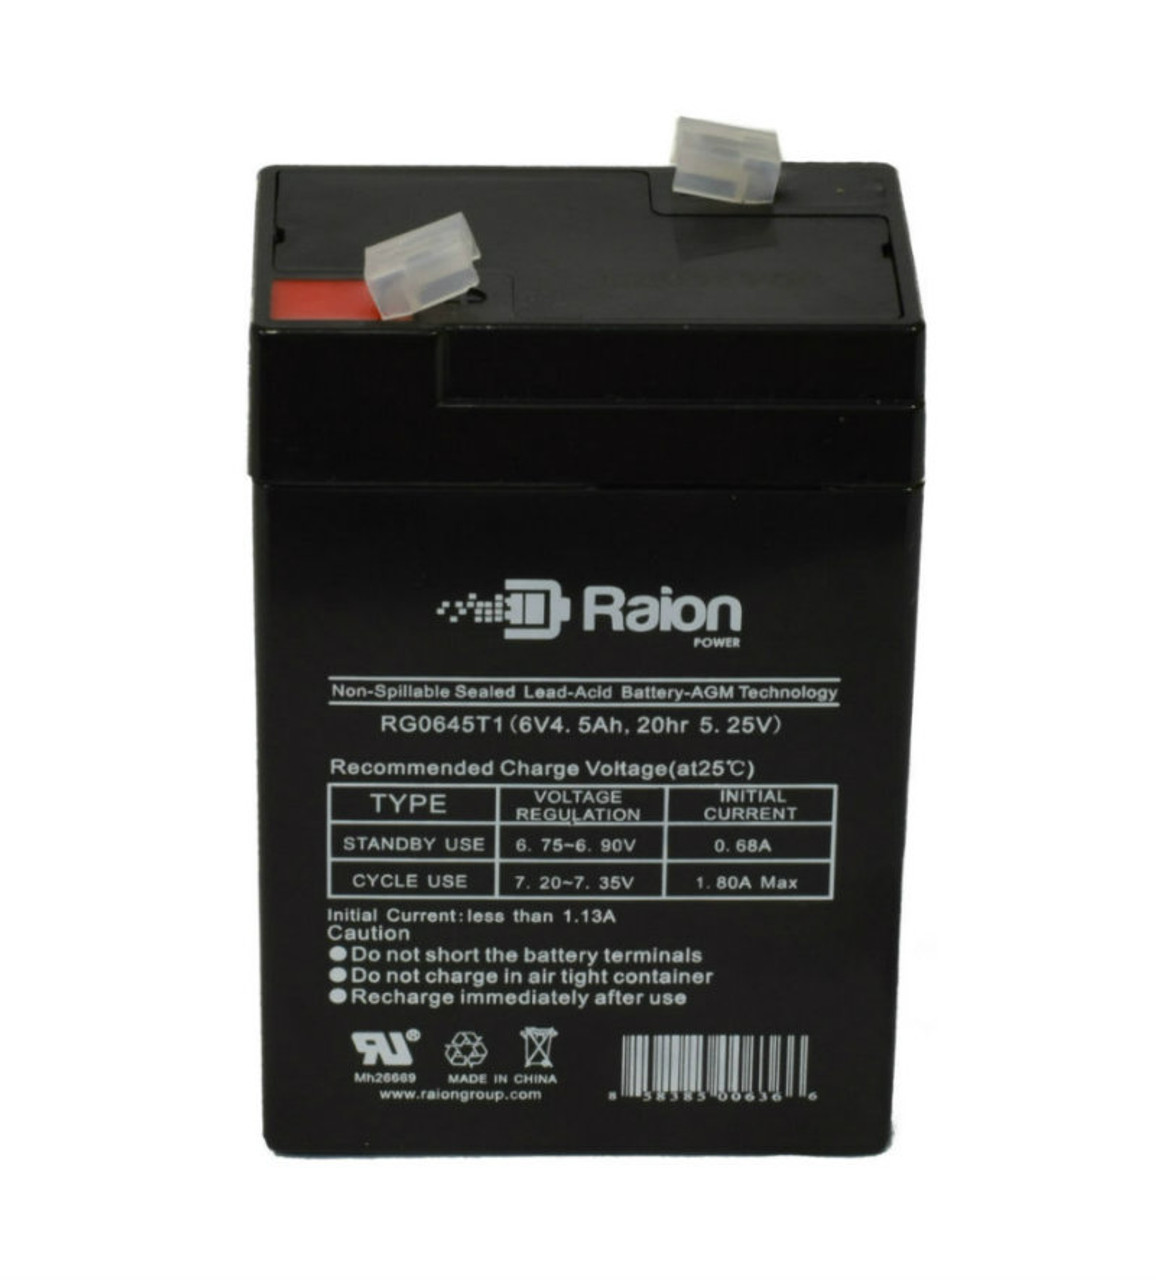 Raion Power RG0645T1 Replacement Battery Cartridge for Eagle Picher CF6VS6